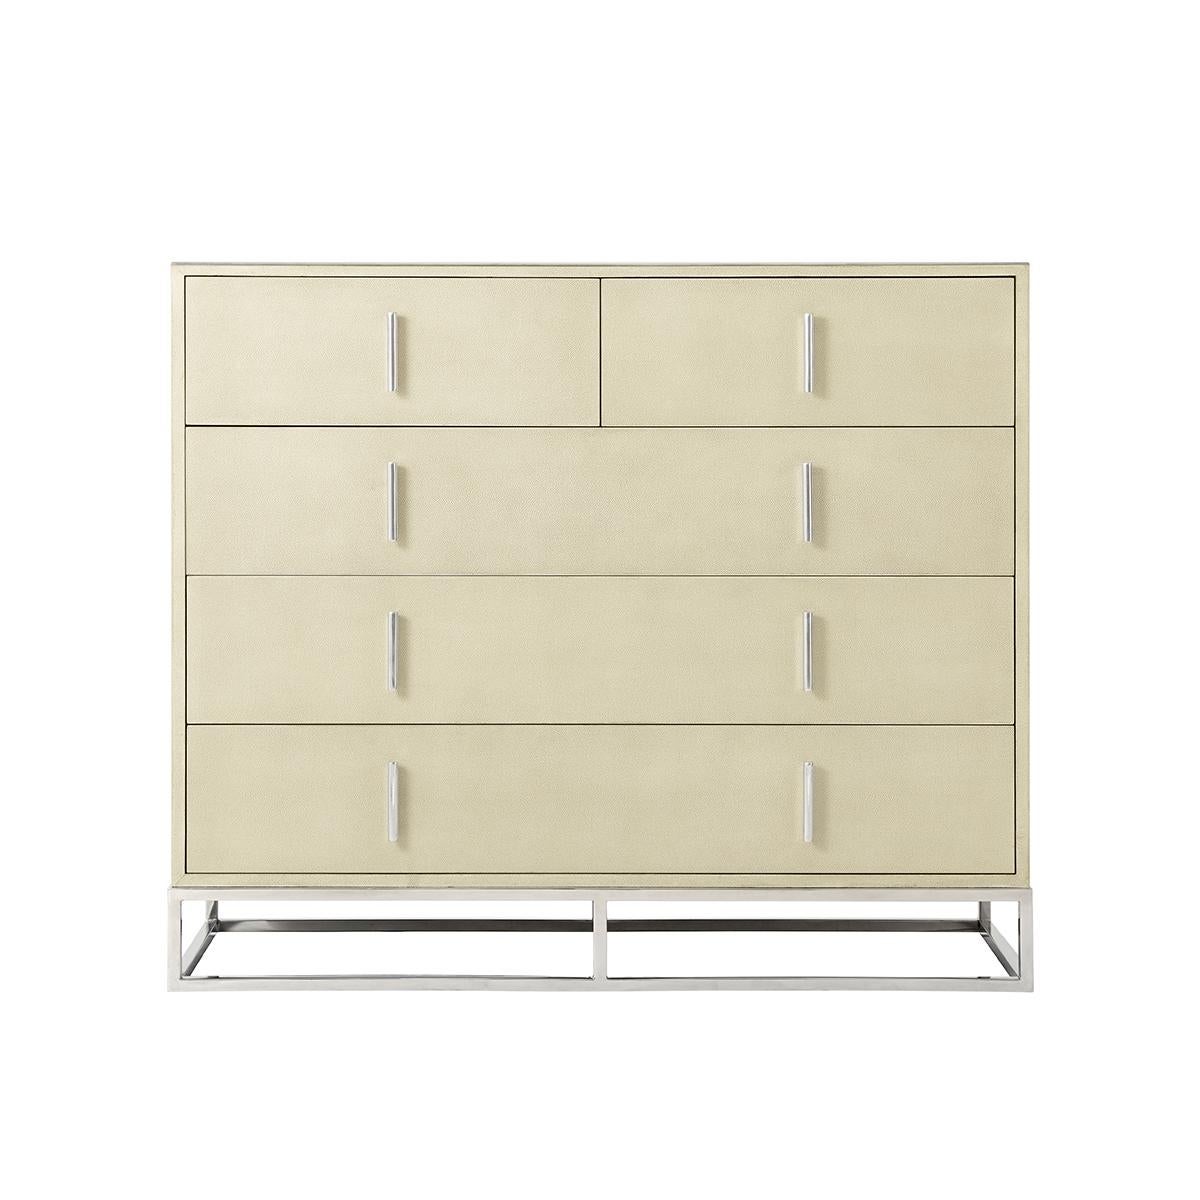 Modern Leather Chest of drawers with a shagreen embossed leather wrapped case in our light overcast finish with two short above three long drawers, polished nickel finish hardware and cube base.

Dimensions: 50